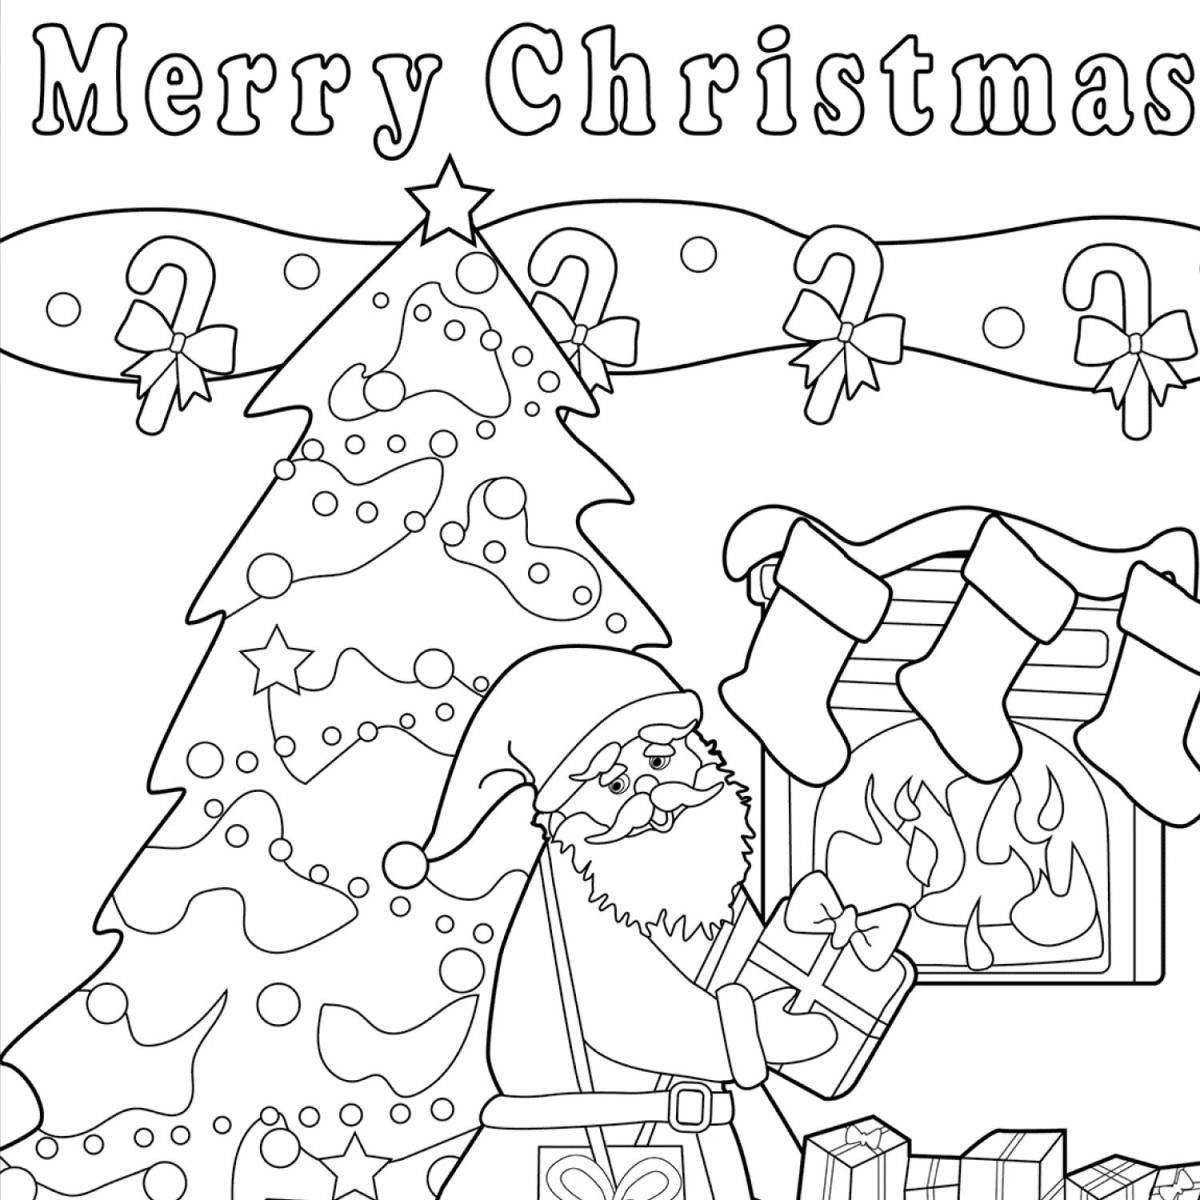 Fine coloring with a Christmas card